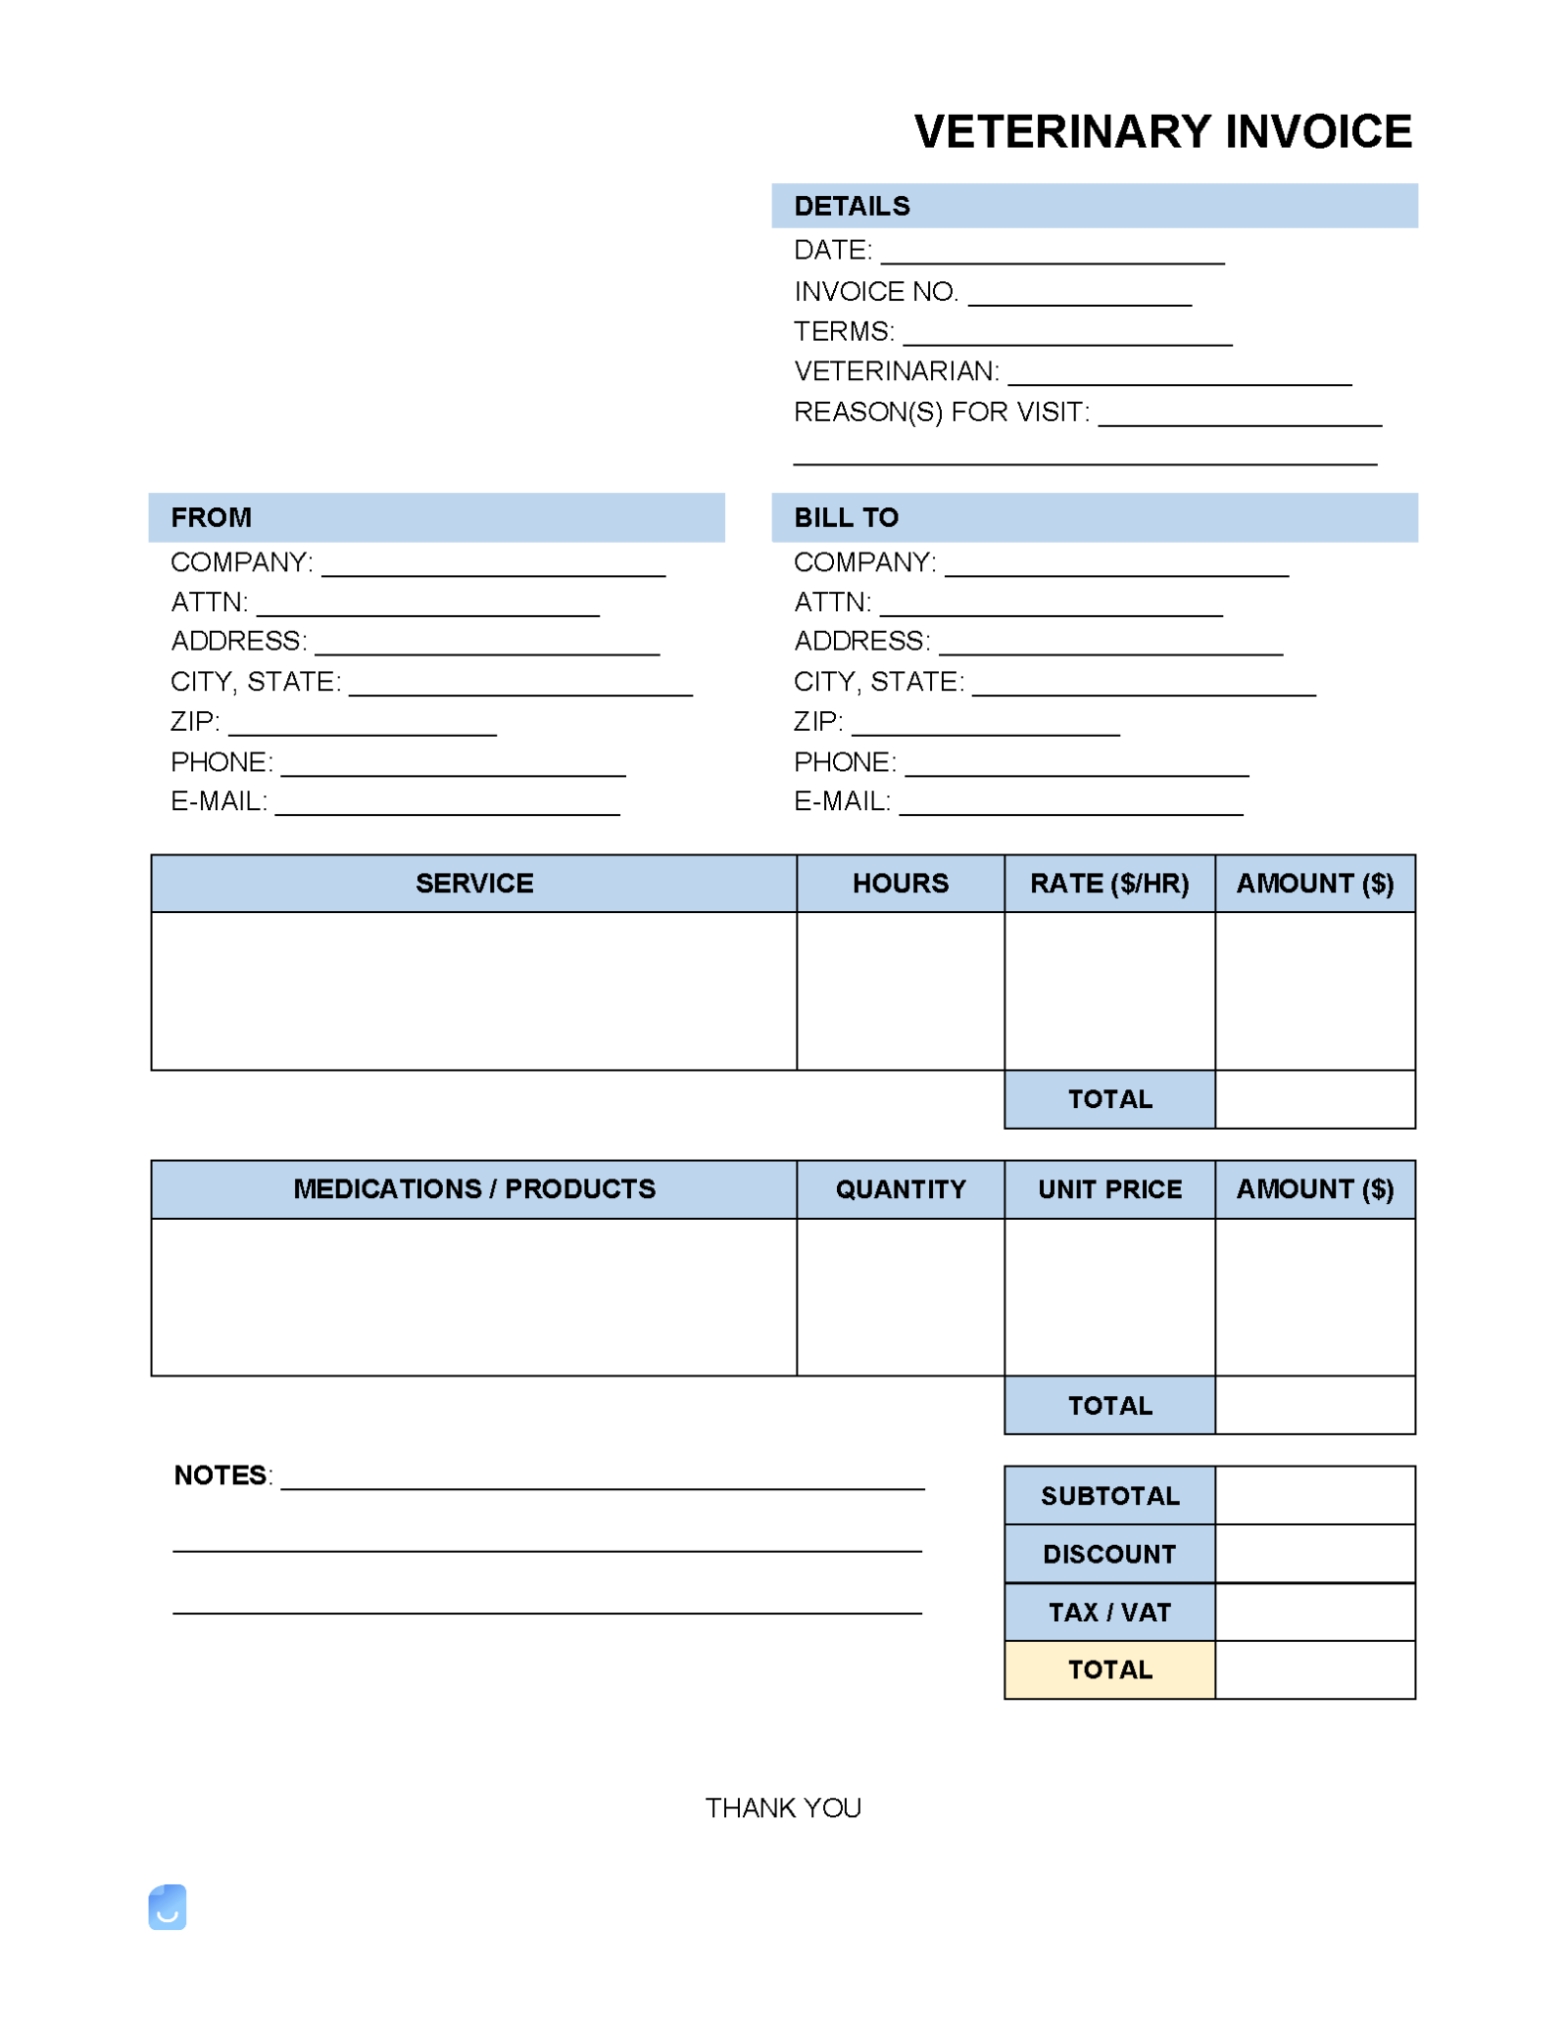 Veterinary Invoice Template With Regard To Veterinary Invoice Template